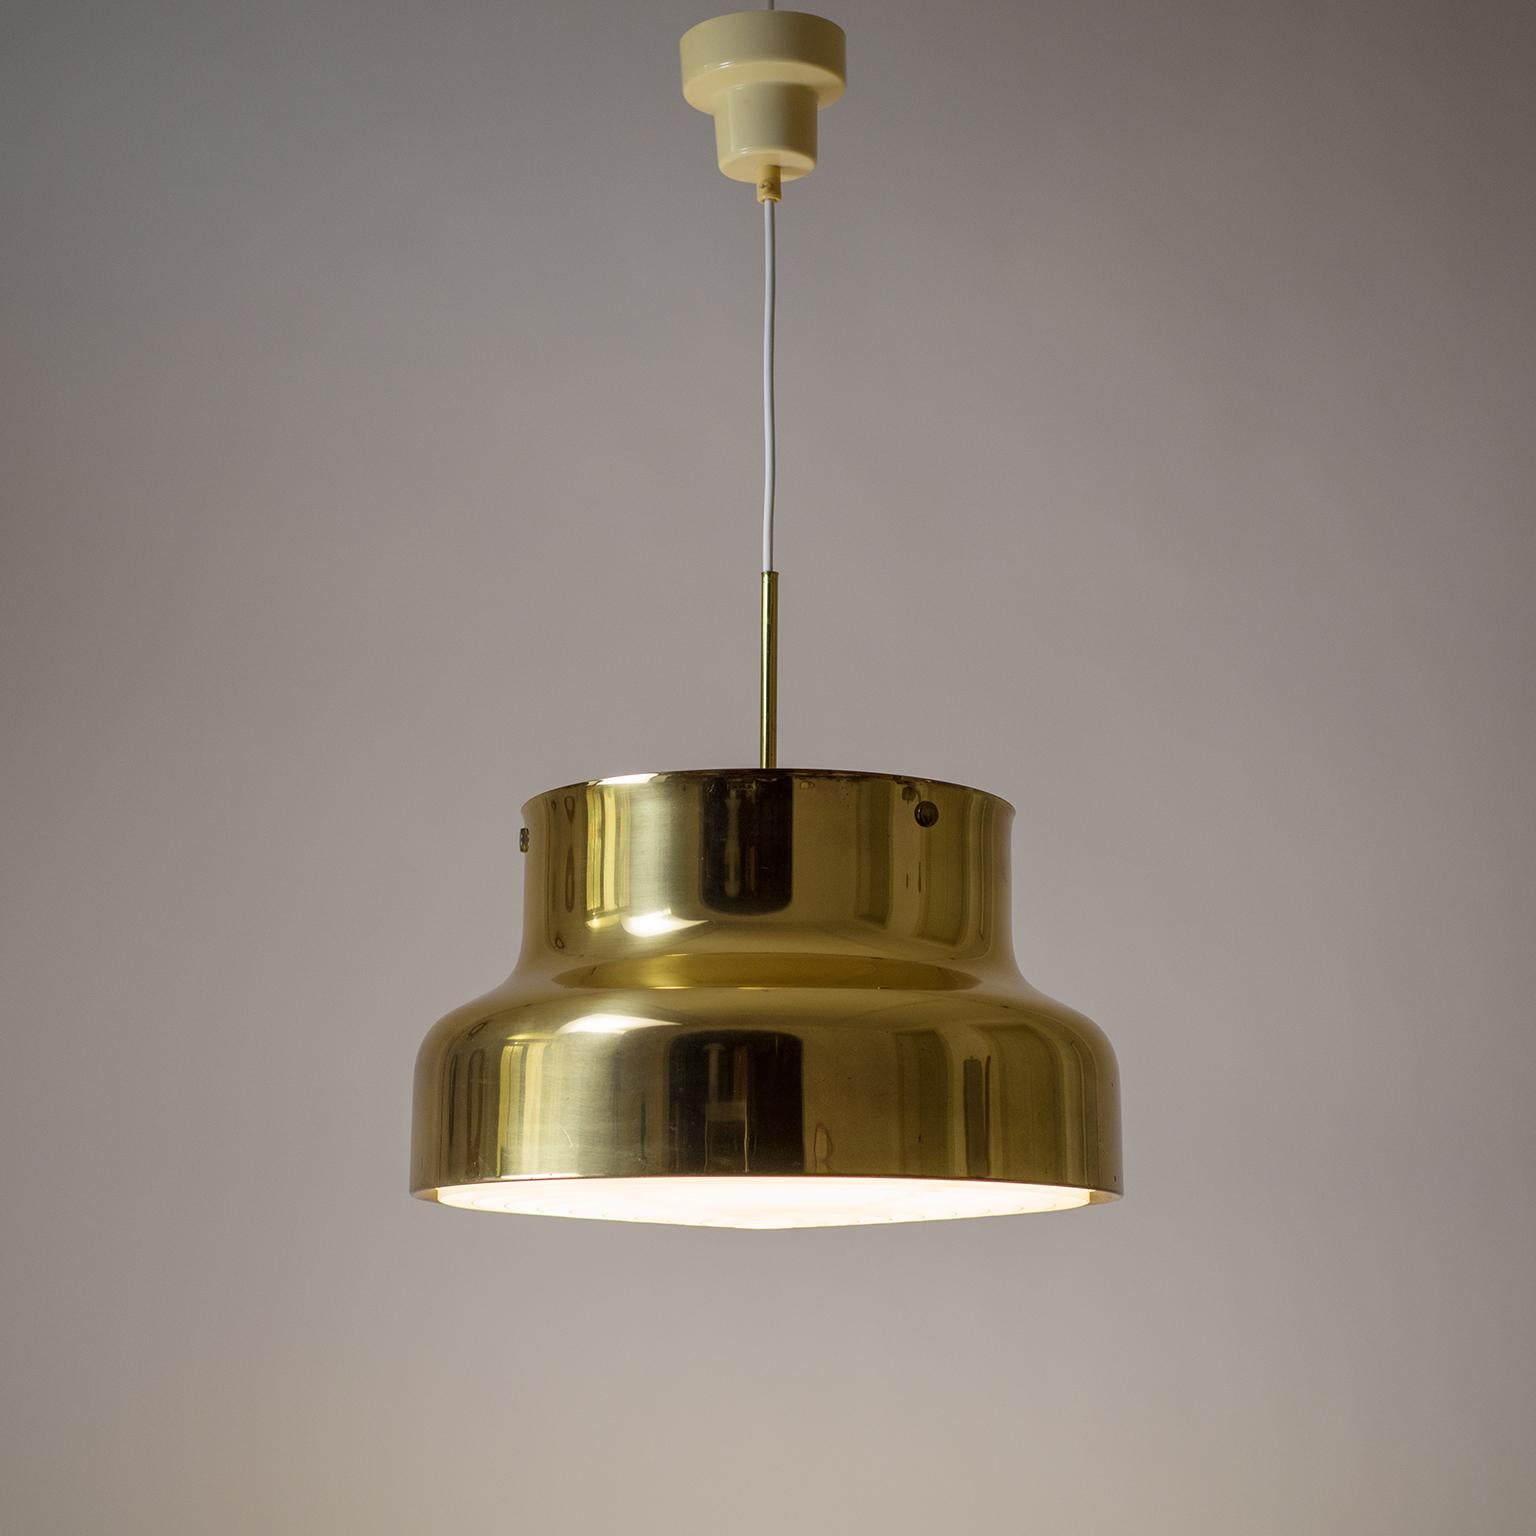 Swedish Large Brass 'Bumling' Pendant, 1970s, by Anders Pherson